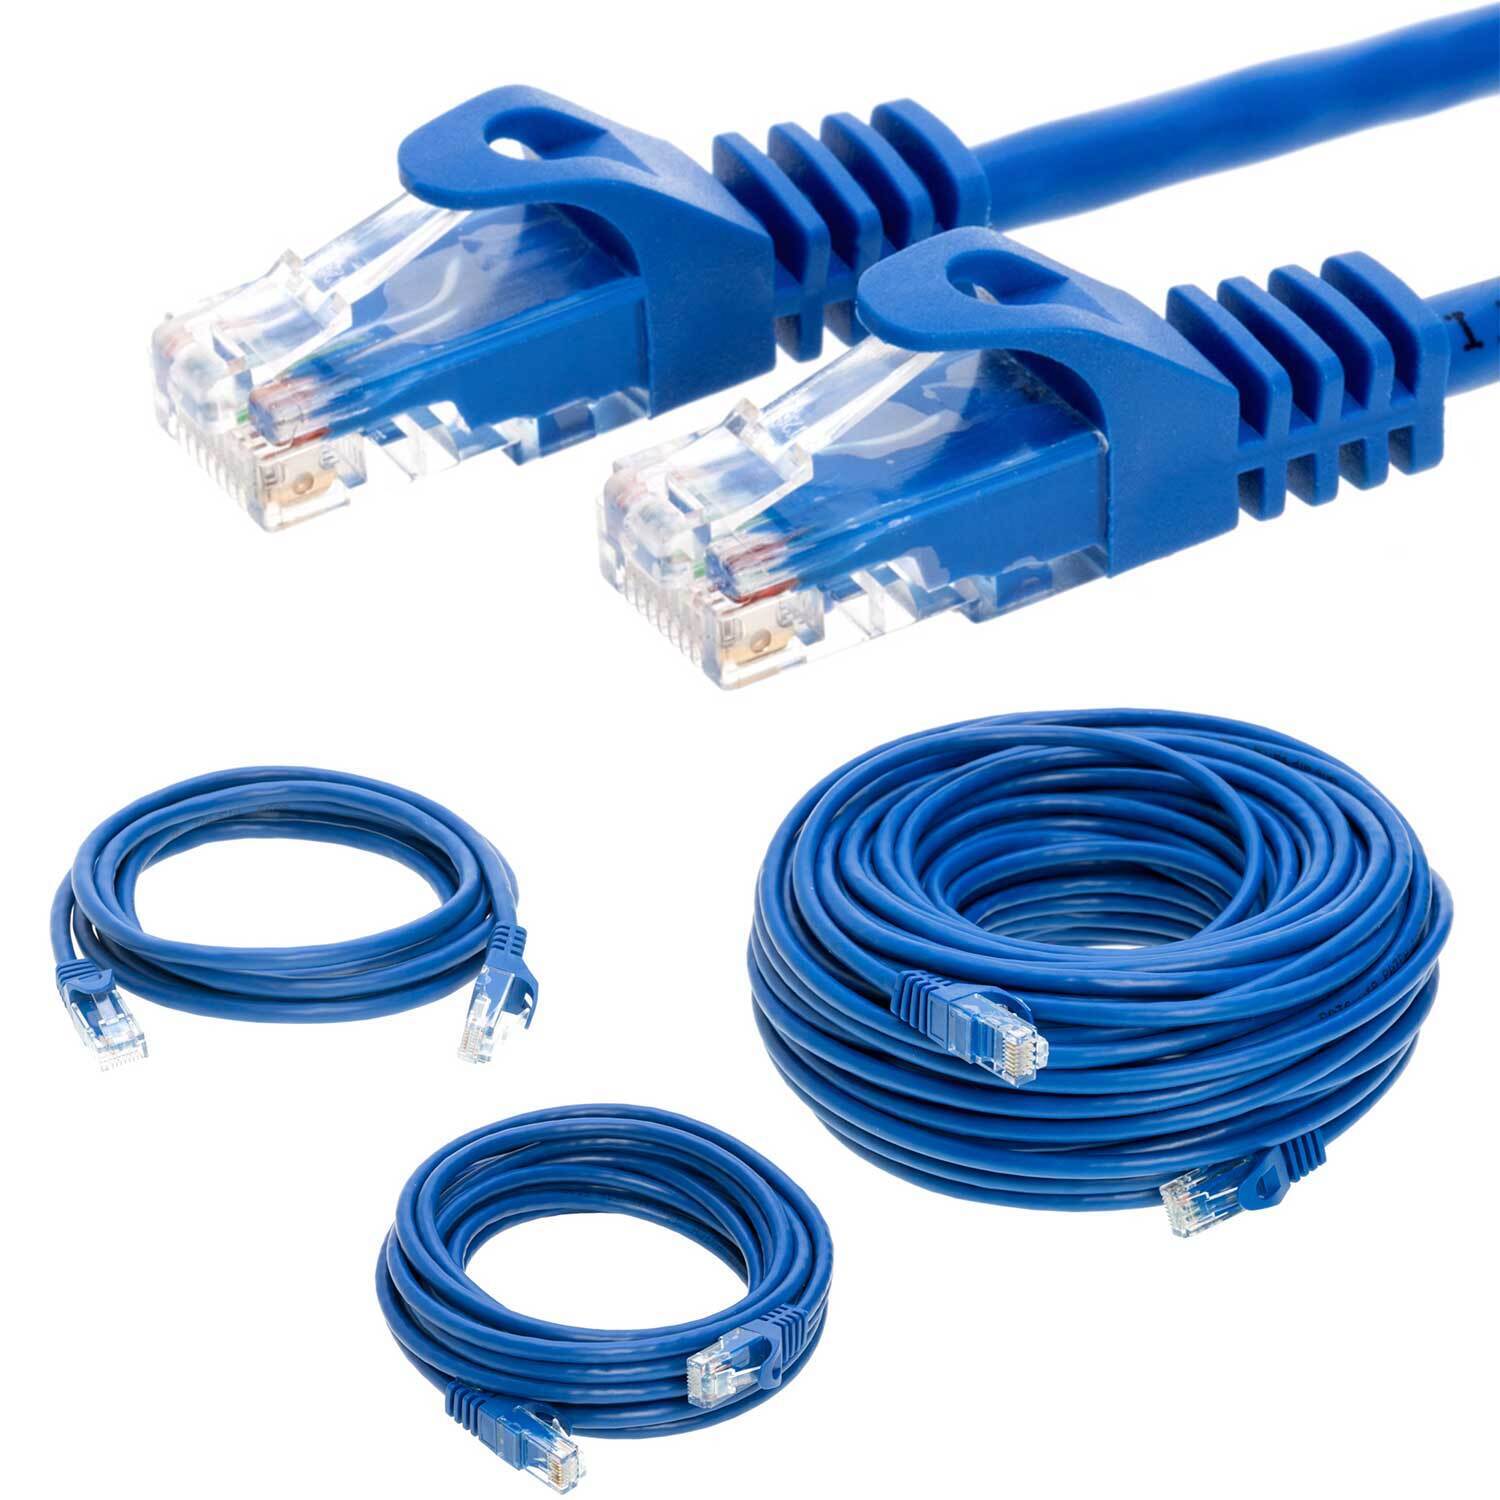 Cat5e CAT5 Network Ethernet Computer Patch Cable PC XBOX, PS3, PS4 Blue lot